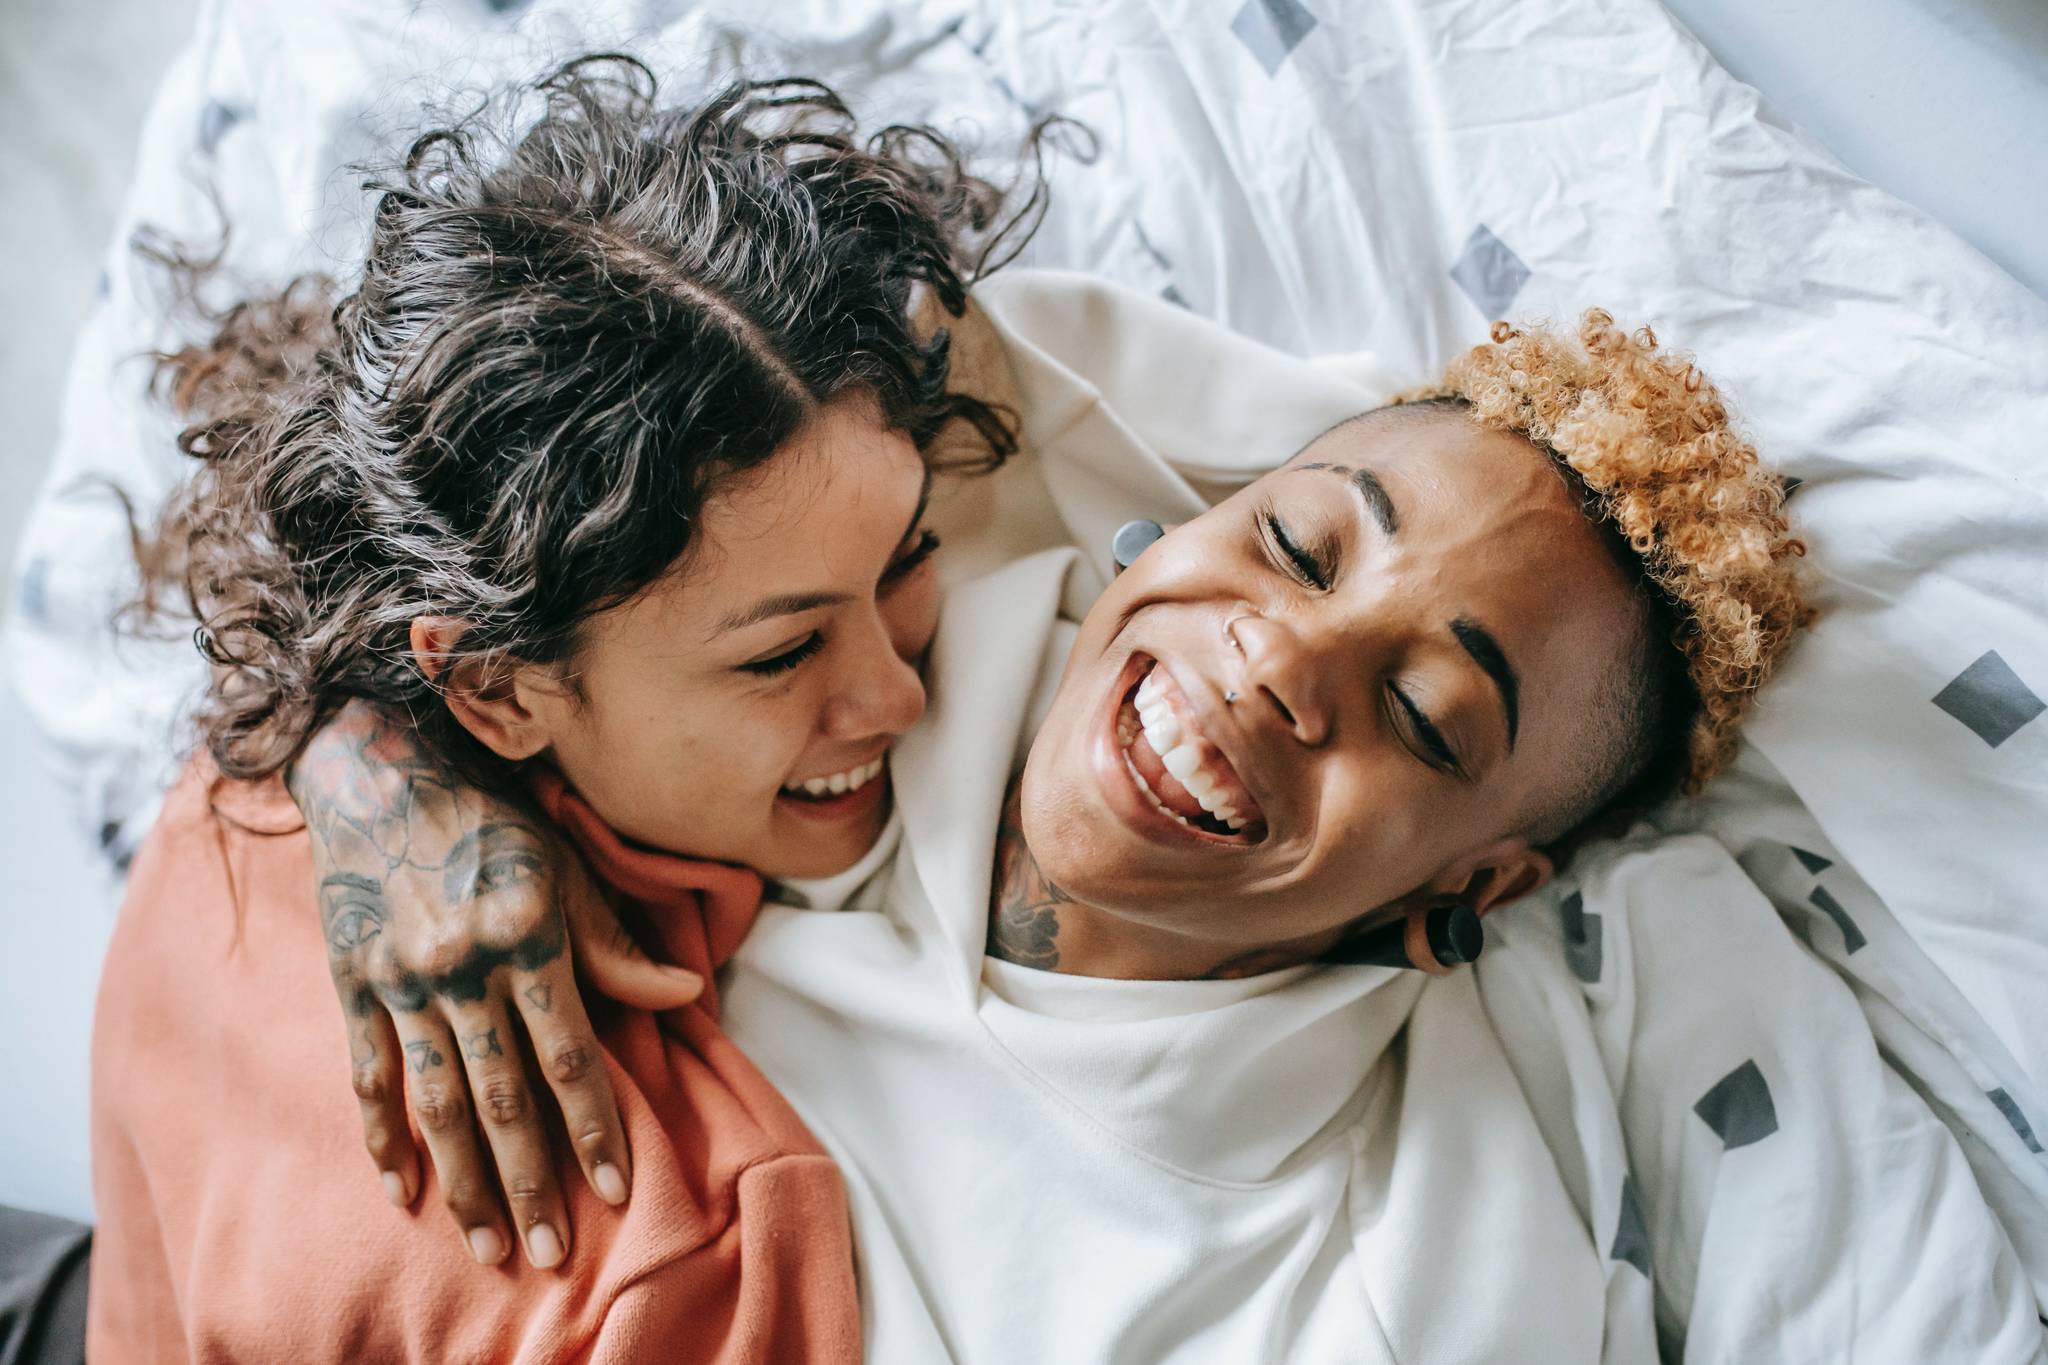 How recreational romance shapes intimacy for Gen Y